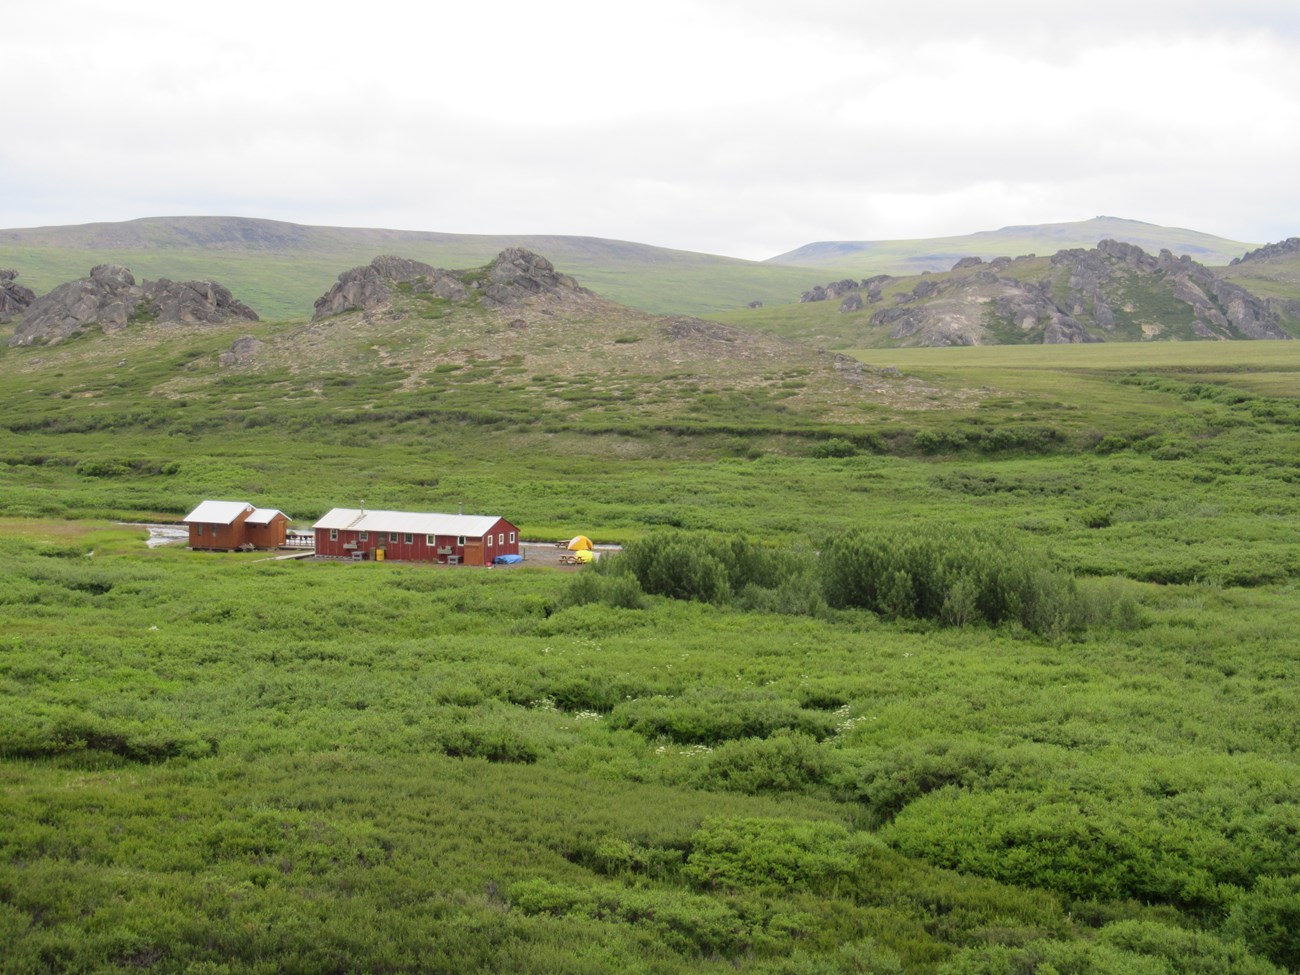 A stand of cottonwood trees next to two reddish buildings. Large granite tors rise in the background.